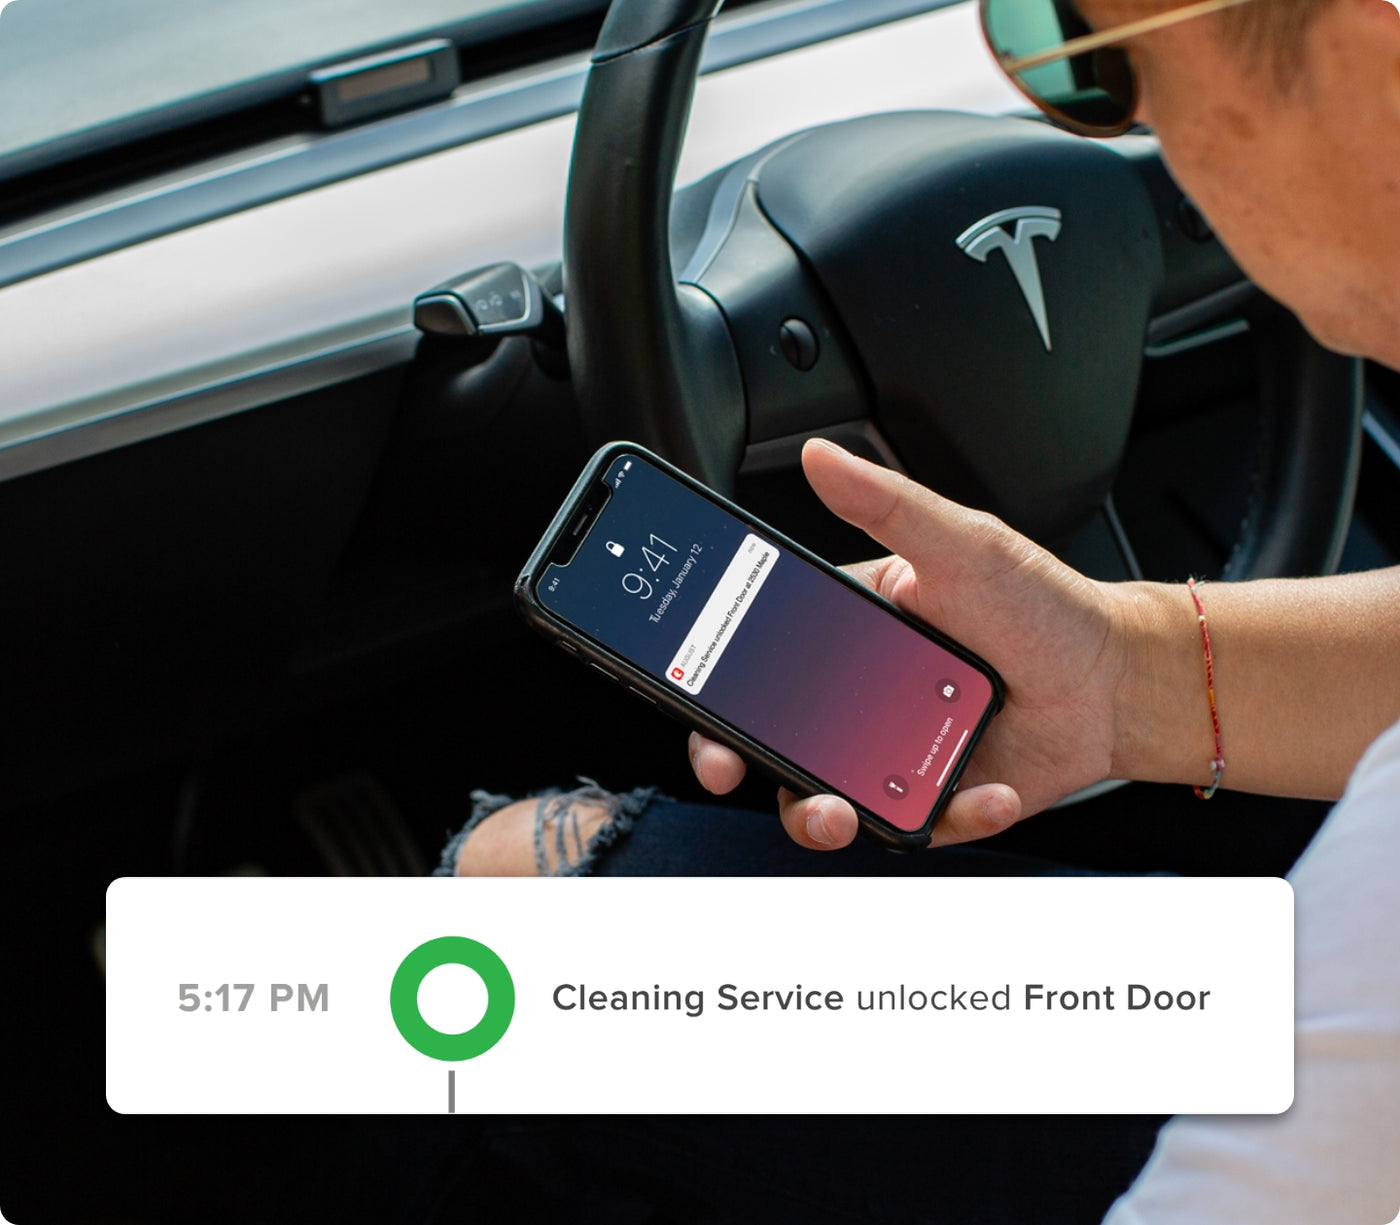 A man in a tesla receiving a notification on his smartphone that the cleaning service has unlocked his front door